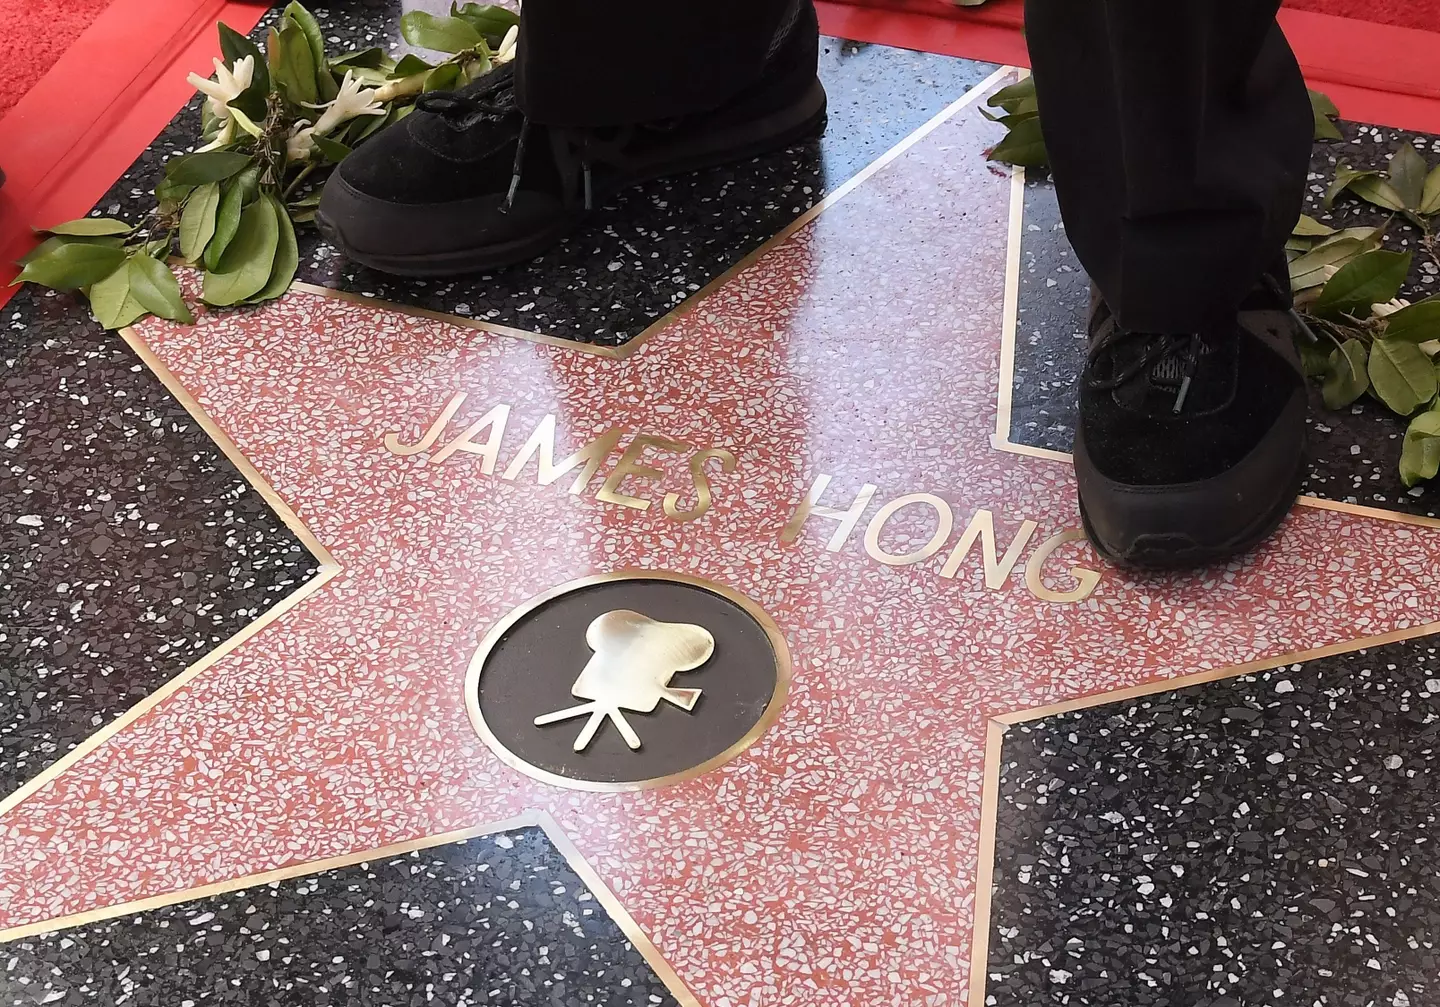 Hong's star now sits alongside the others on Hollywood Boulevard.